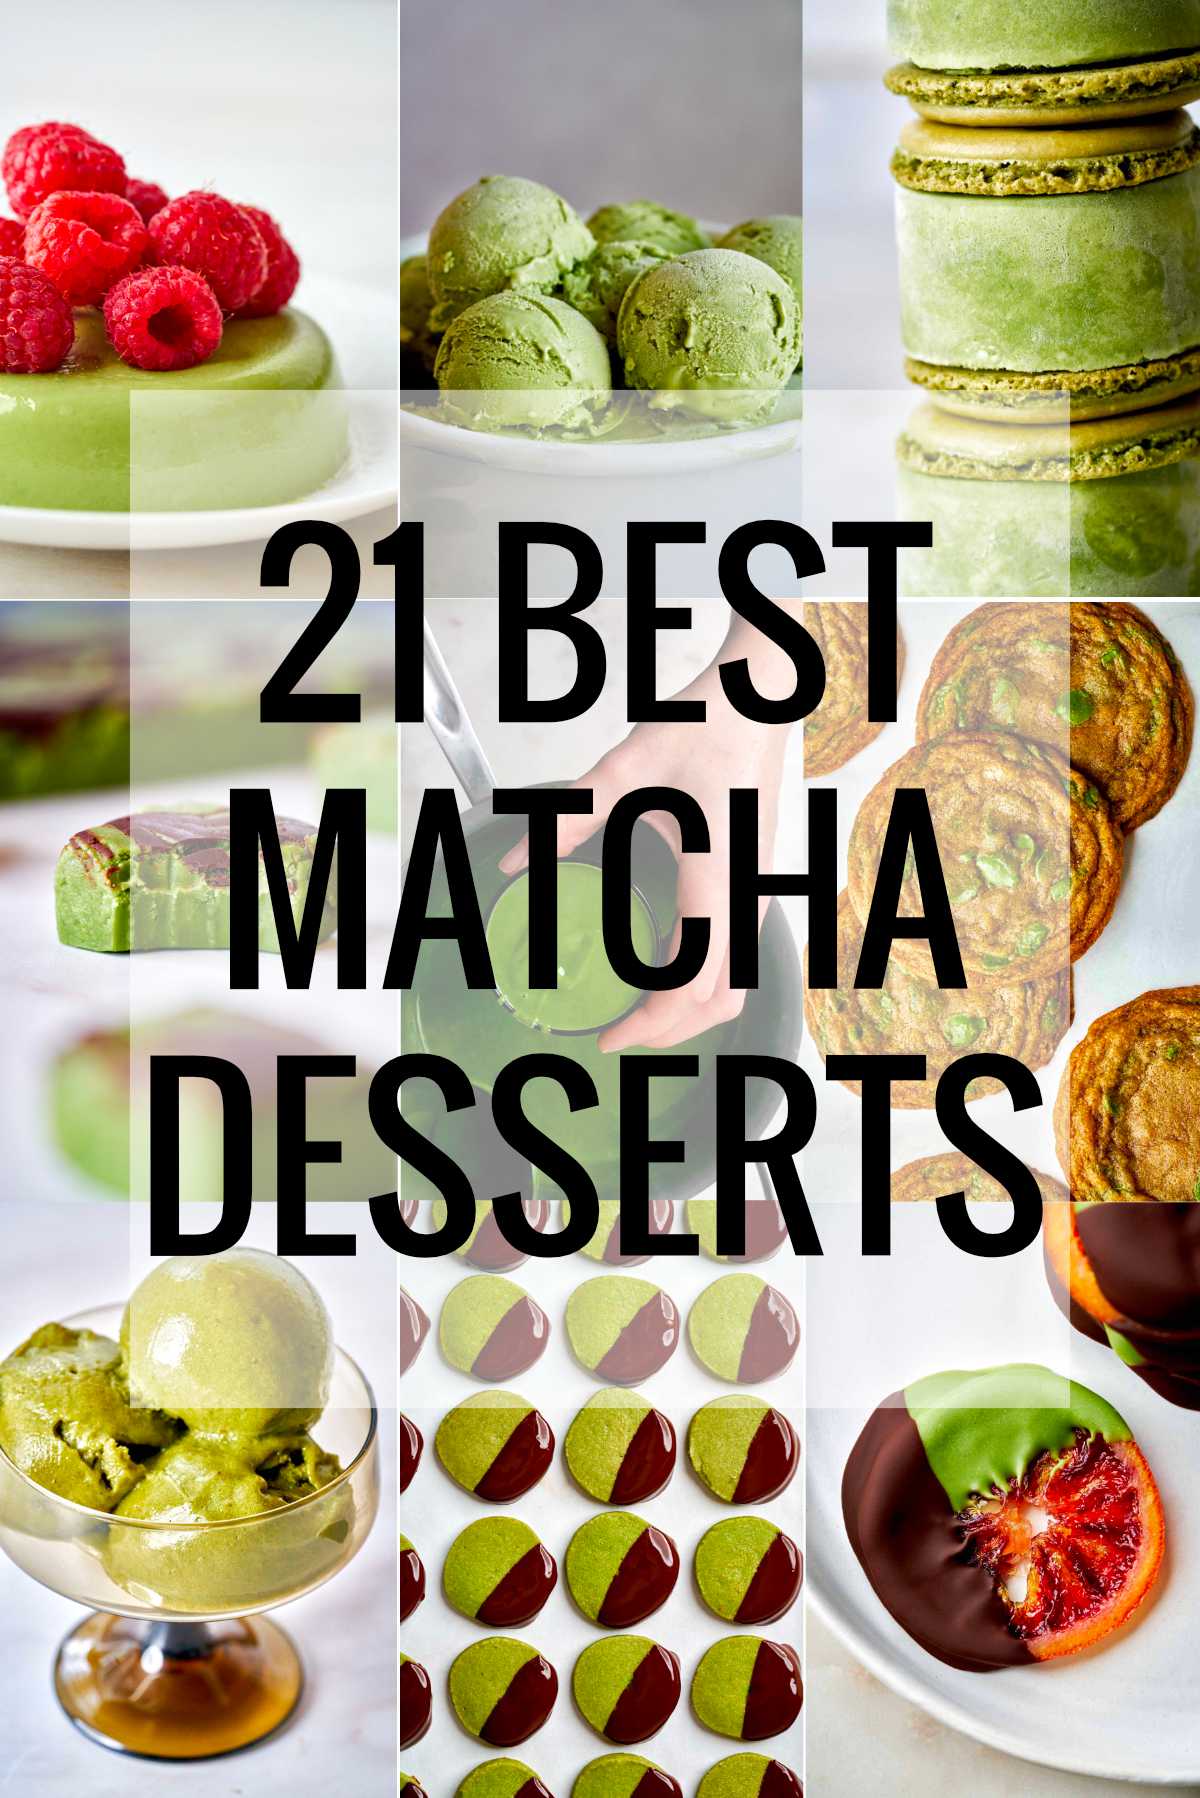 Collage of matcha desserts with title text.